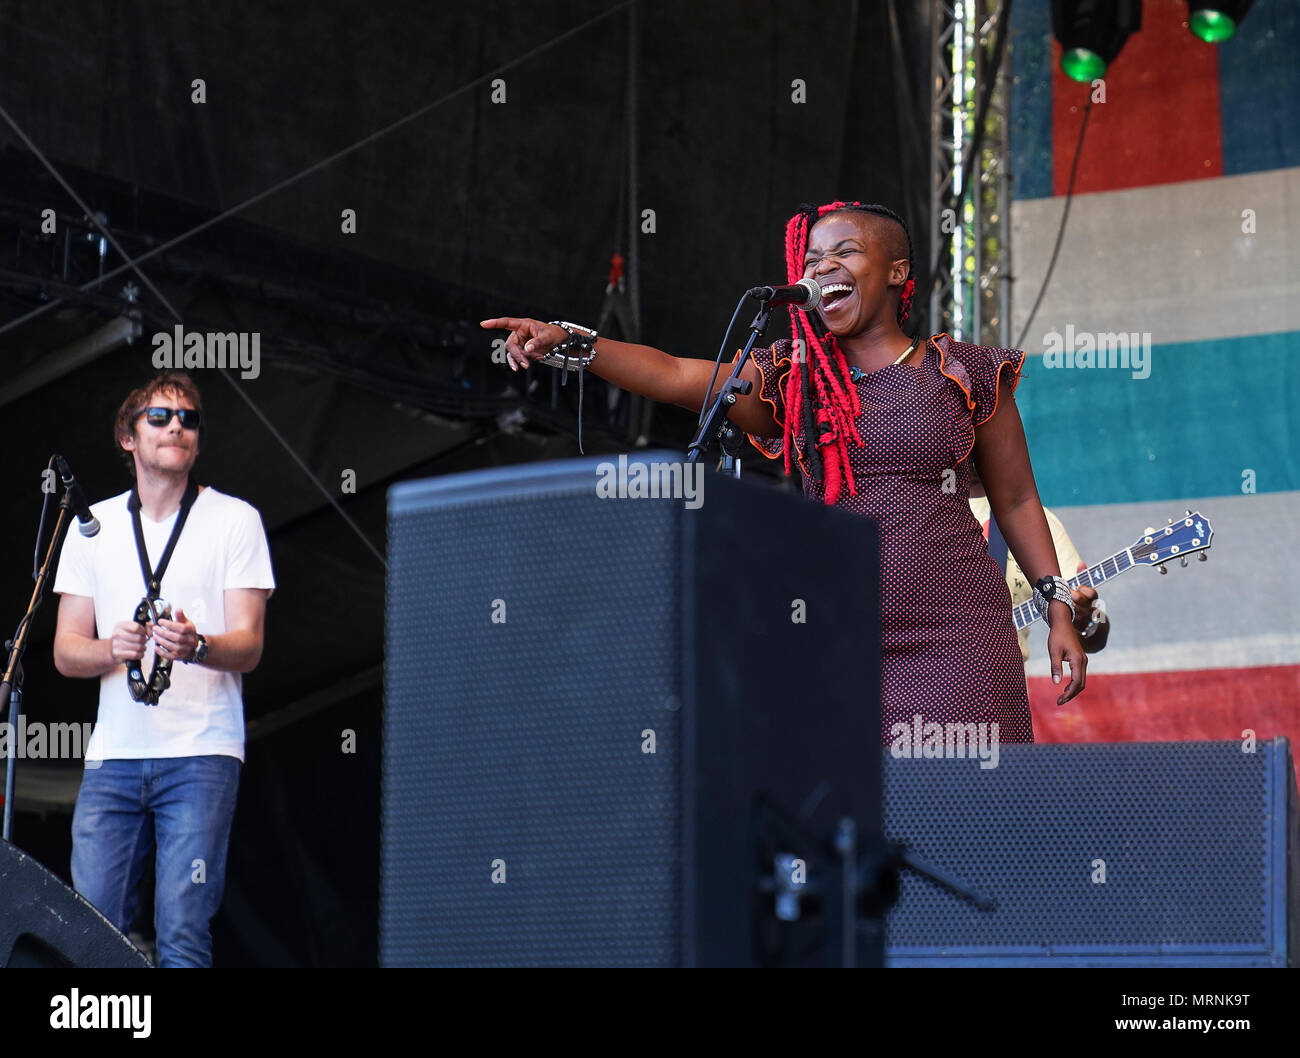 Helsinki, Finland. 26th May, 2017. Freshlyground from South Africa performing on the Savannah Stage at the annual World Village Festival in Kaisaniemi Park in Helsinki, Finland . Credit: Mikko Palonkorpi/Alamy Live News. Stock Photo